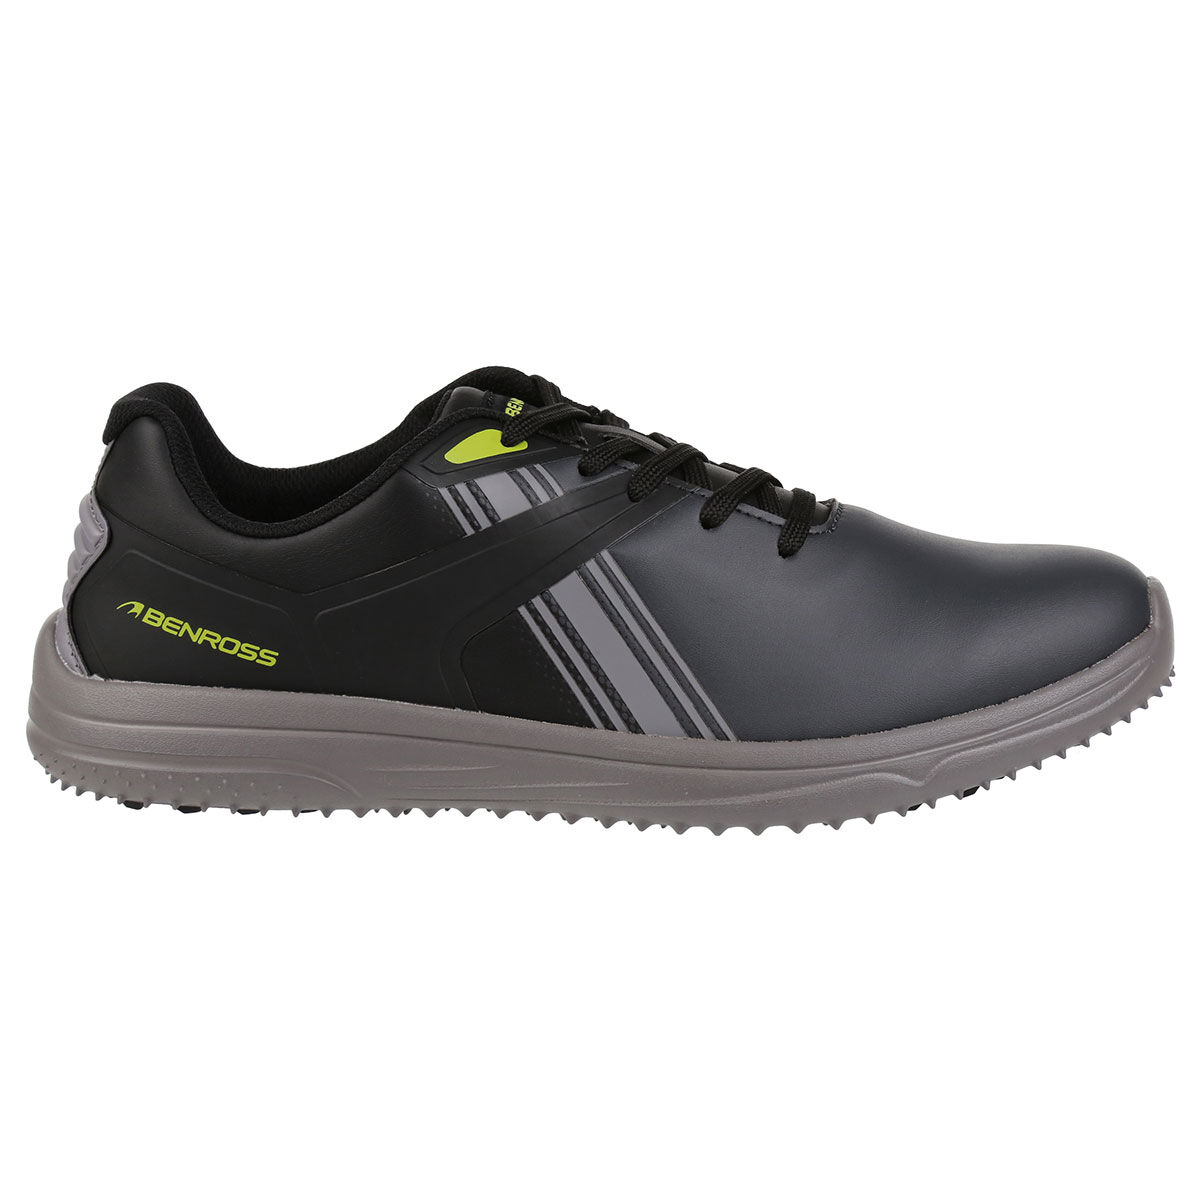 Benross Black, Grey and Yellow Stylish Colour Block Dynamo Waterproof Spikeless Golf Shoes, Size: 9 | American Golf